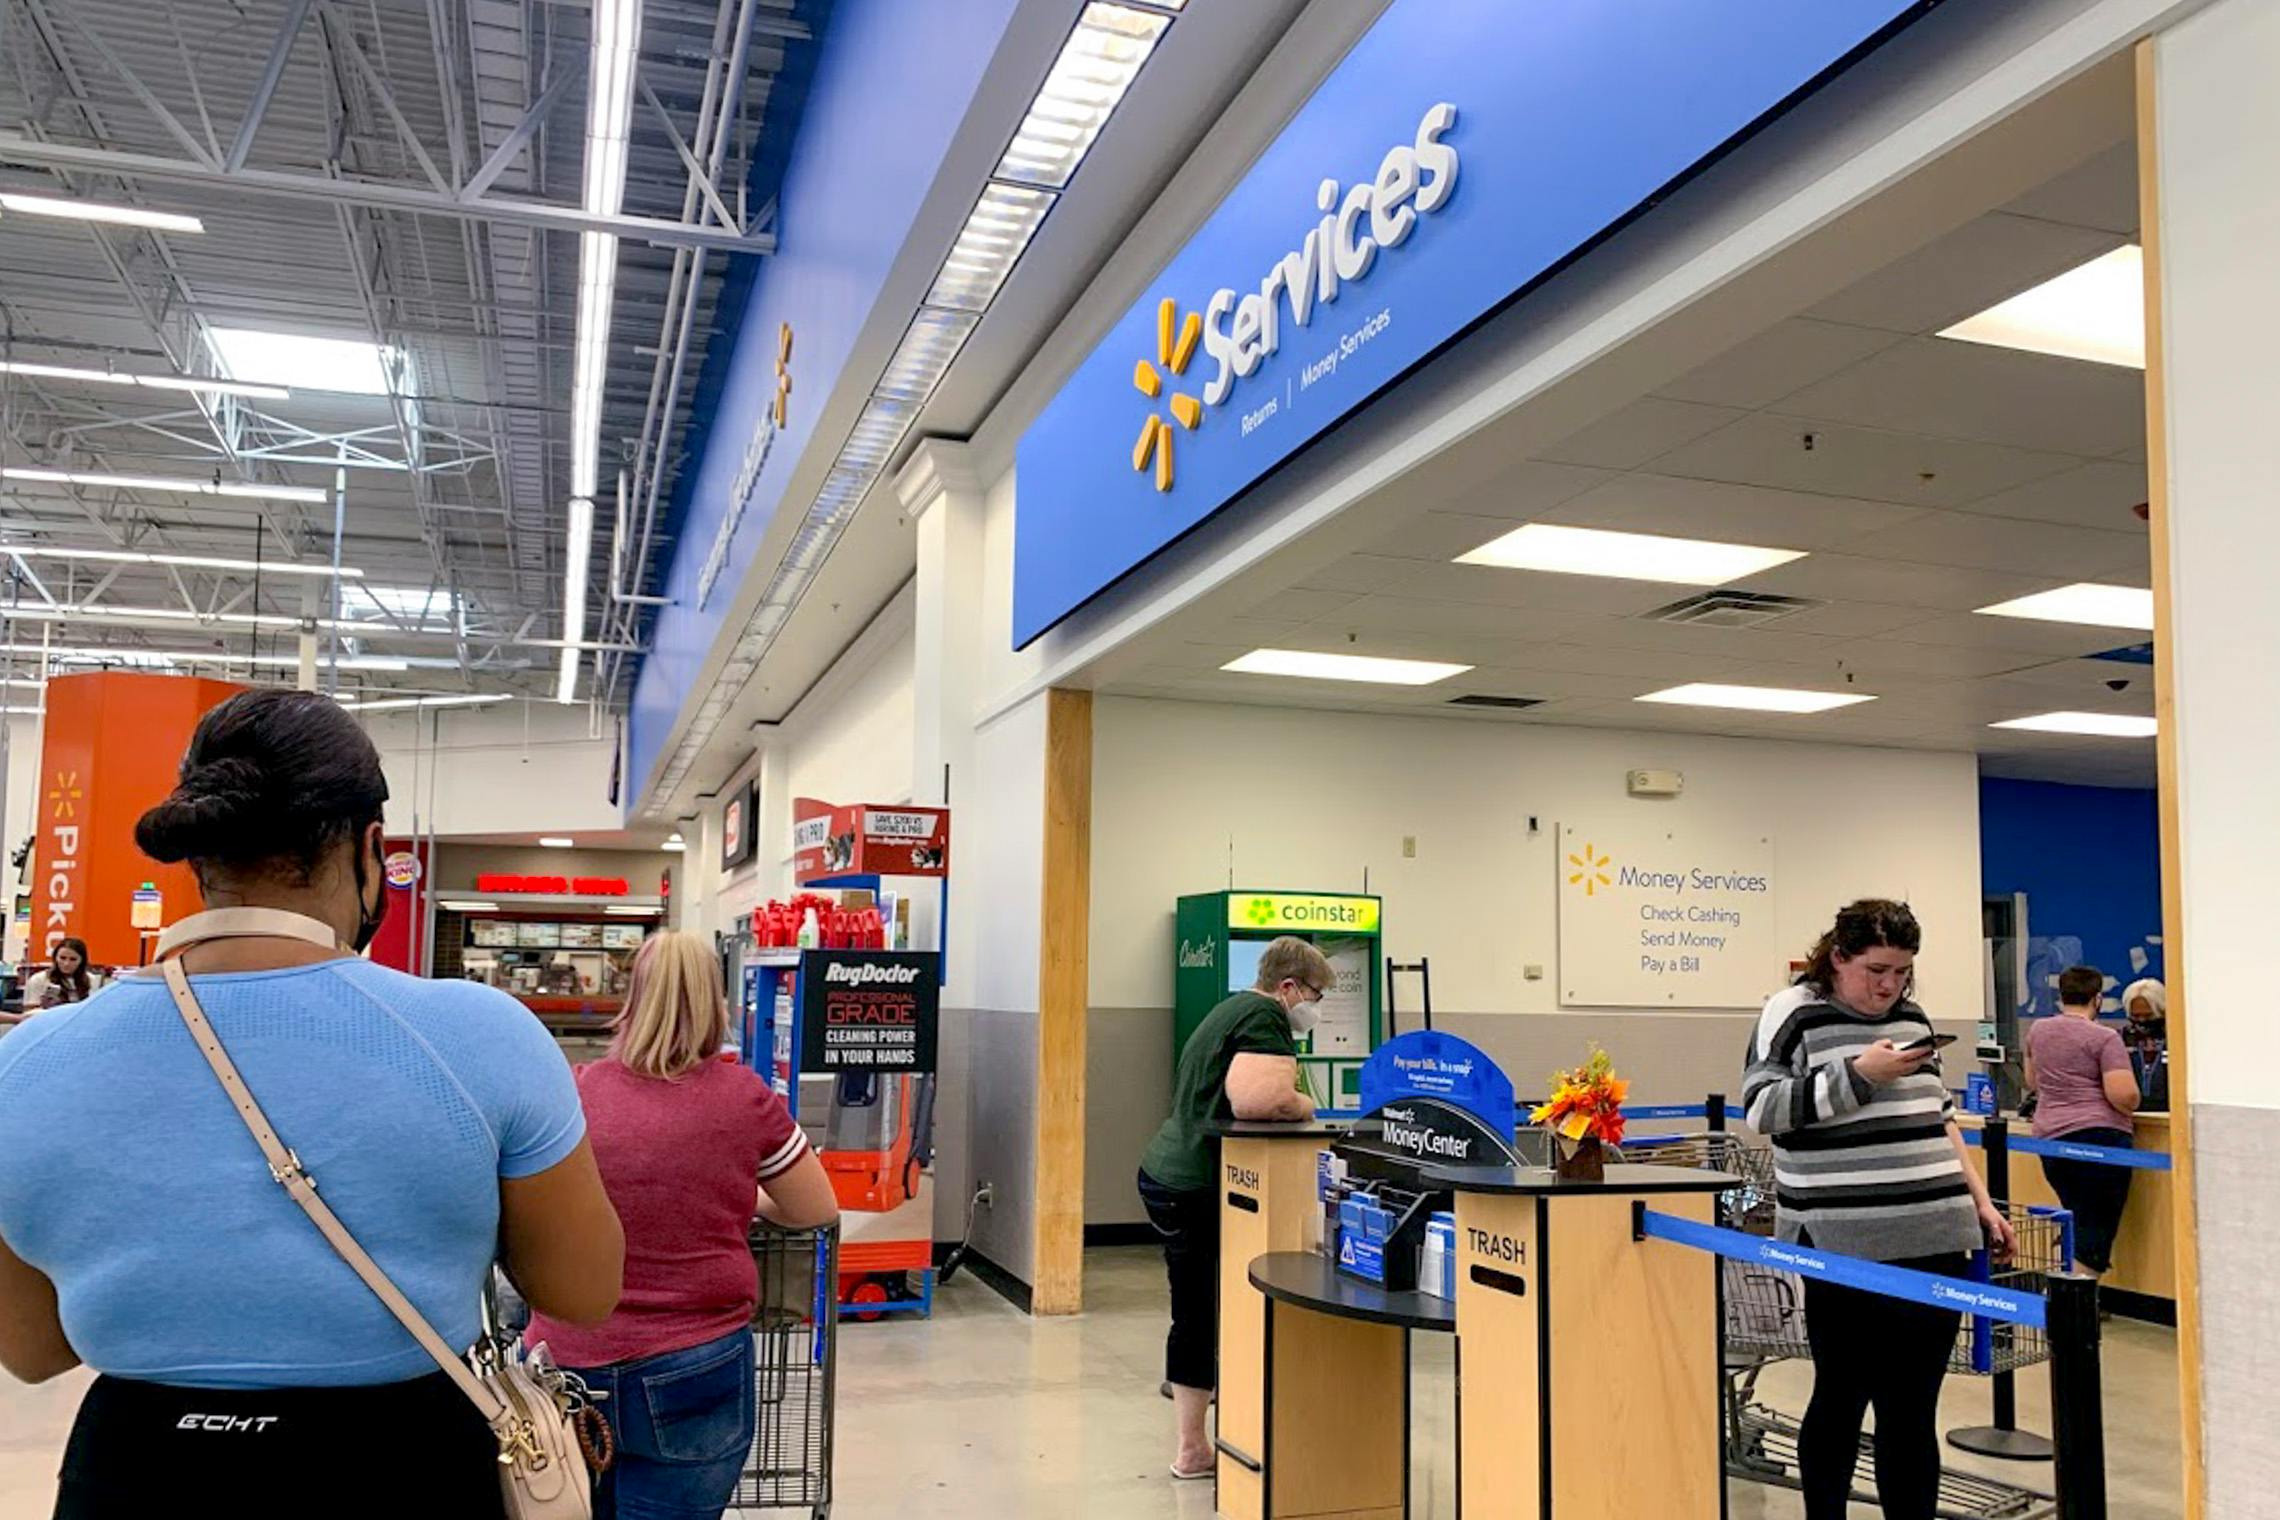 Does Walmart Do Background Checks In 2022? (+ Other FAQs)